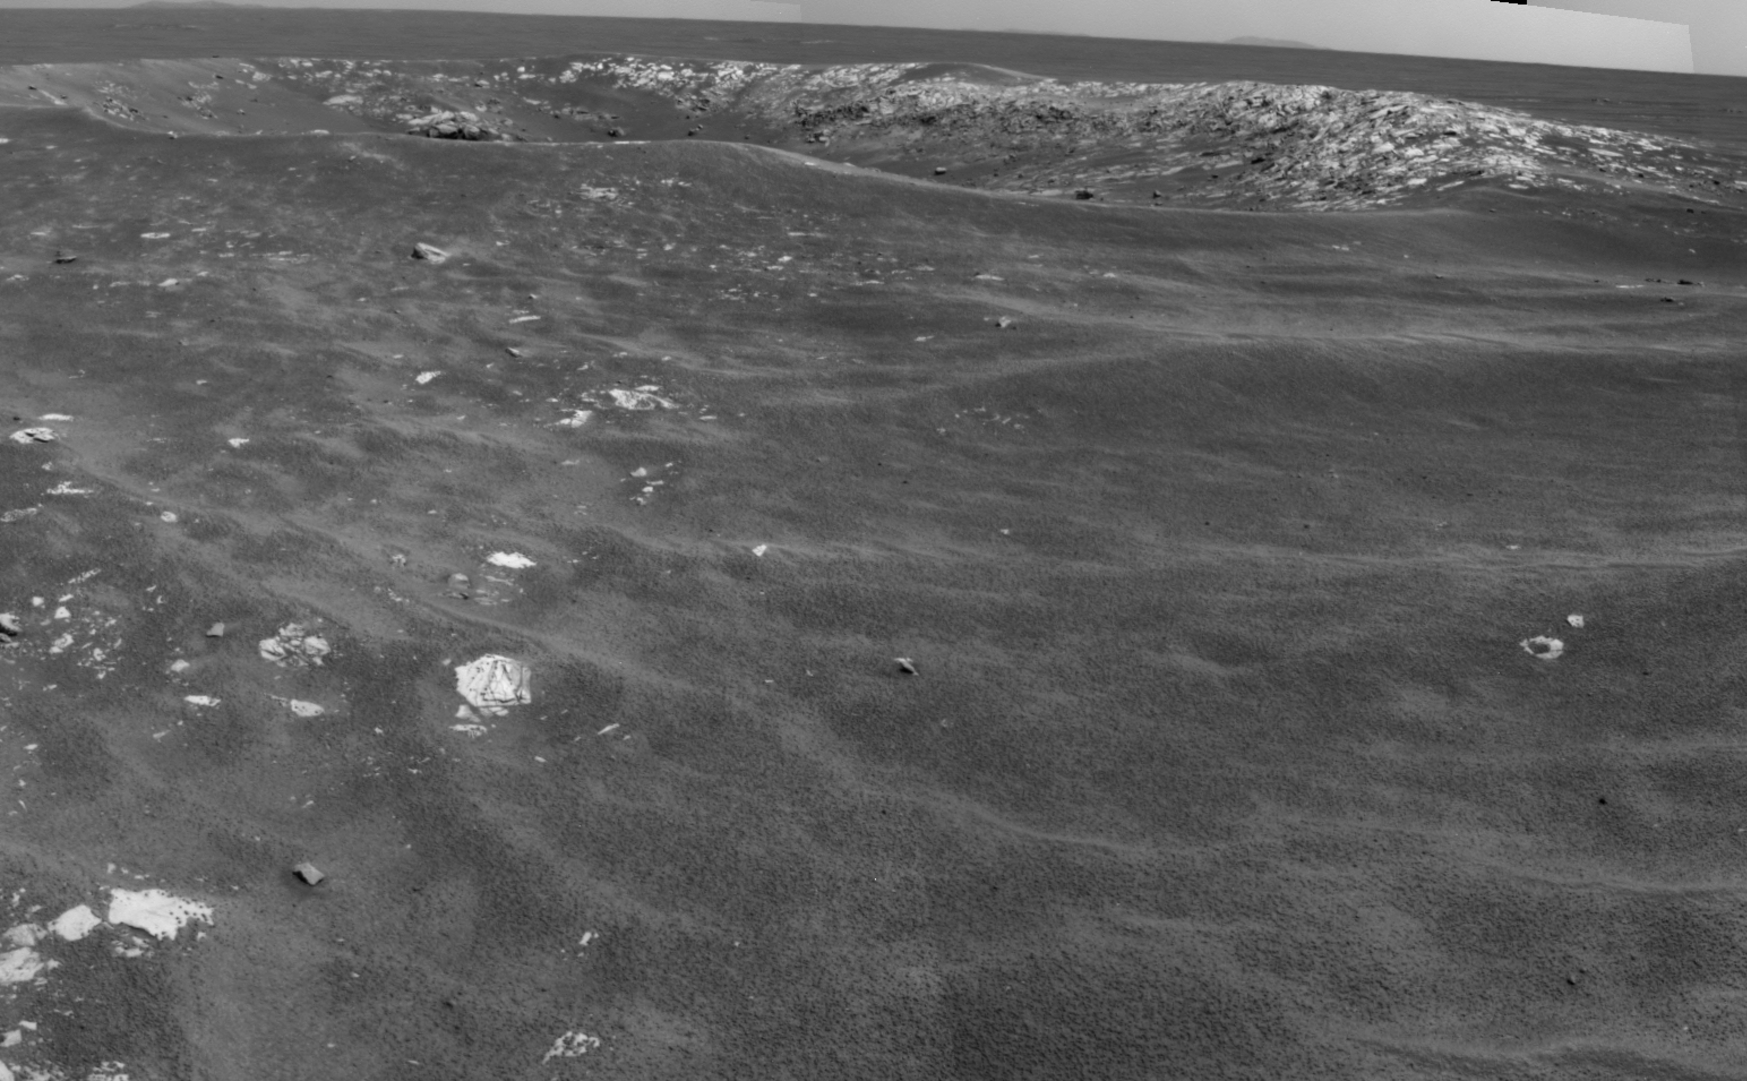 NASA's Mars Exploration Rover Opportunity recorded this view of a crater informally named "Freedom 7" shortly before the 50th anniversary of the first American in space: astronaut Alan Shepard's flight in the Freedom 7 spacecraft.